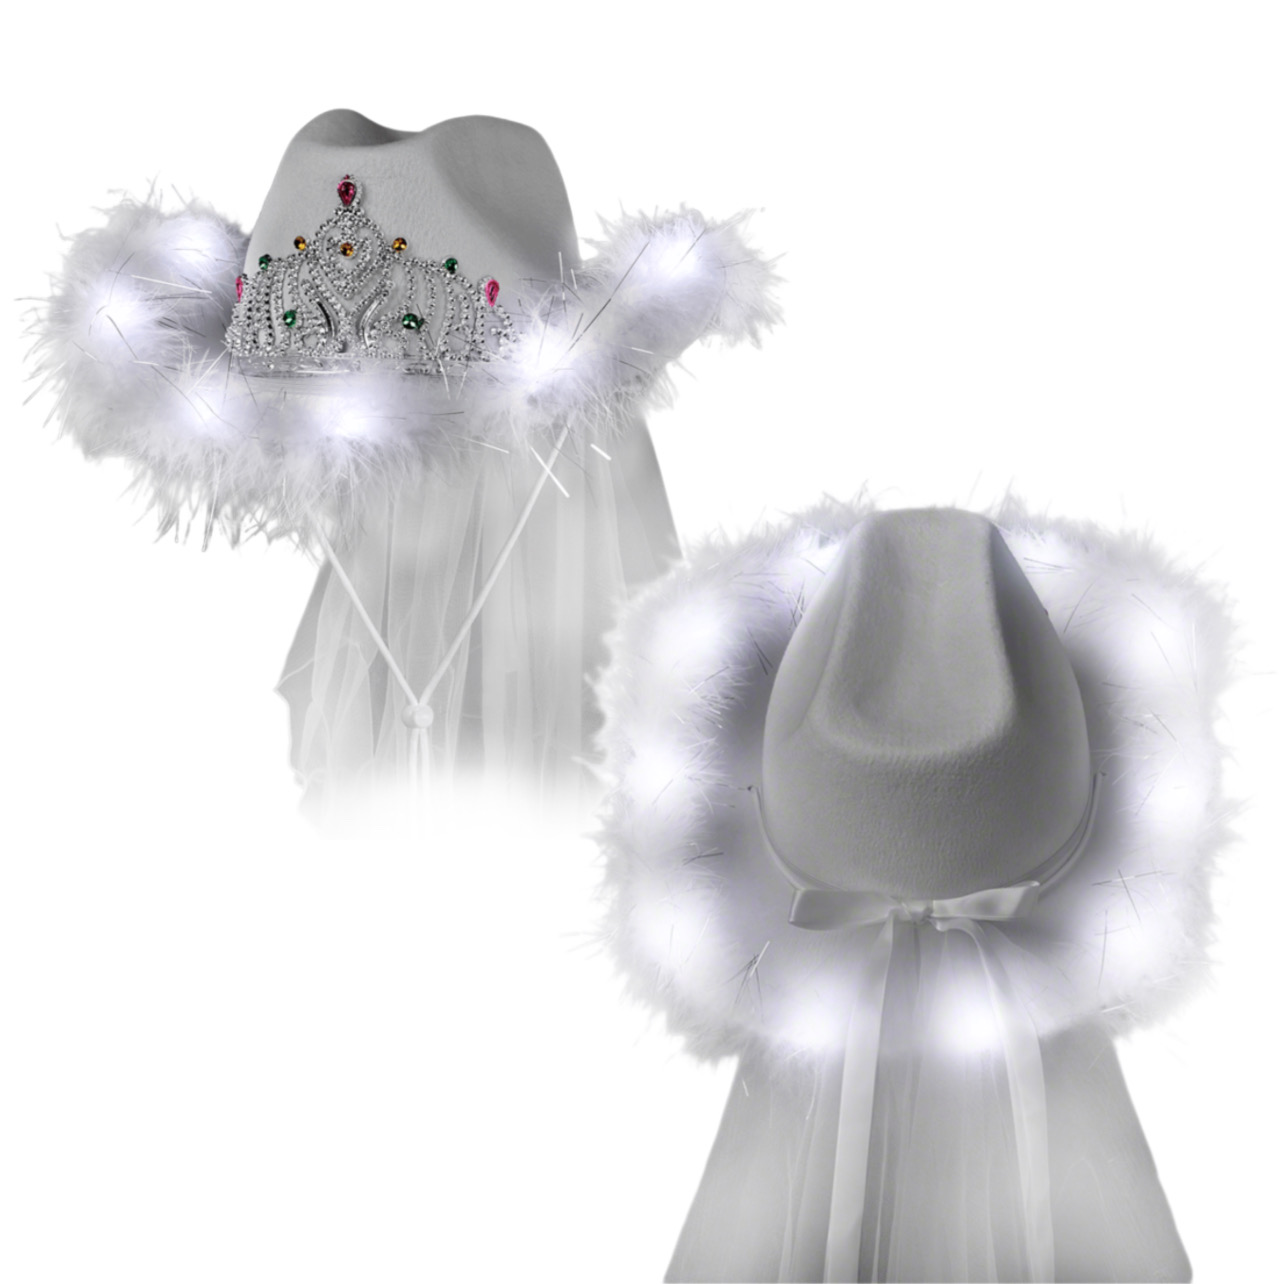 Light Up White Tiara Bridal Cowboy Cowgirl Hat with Veil for Bachelorette and Bridal Party All Products 5